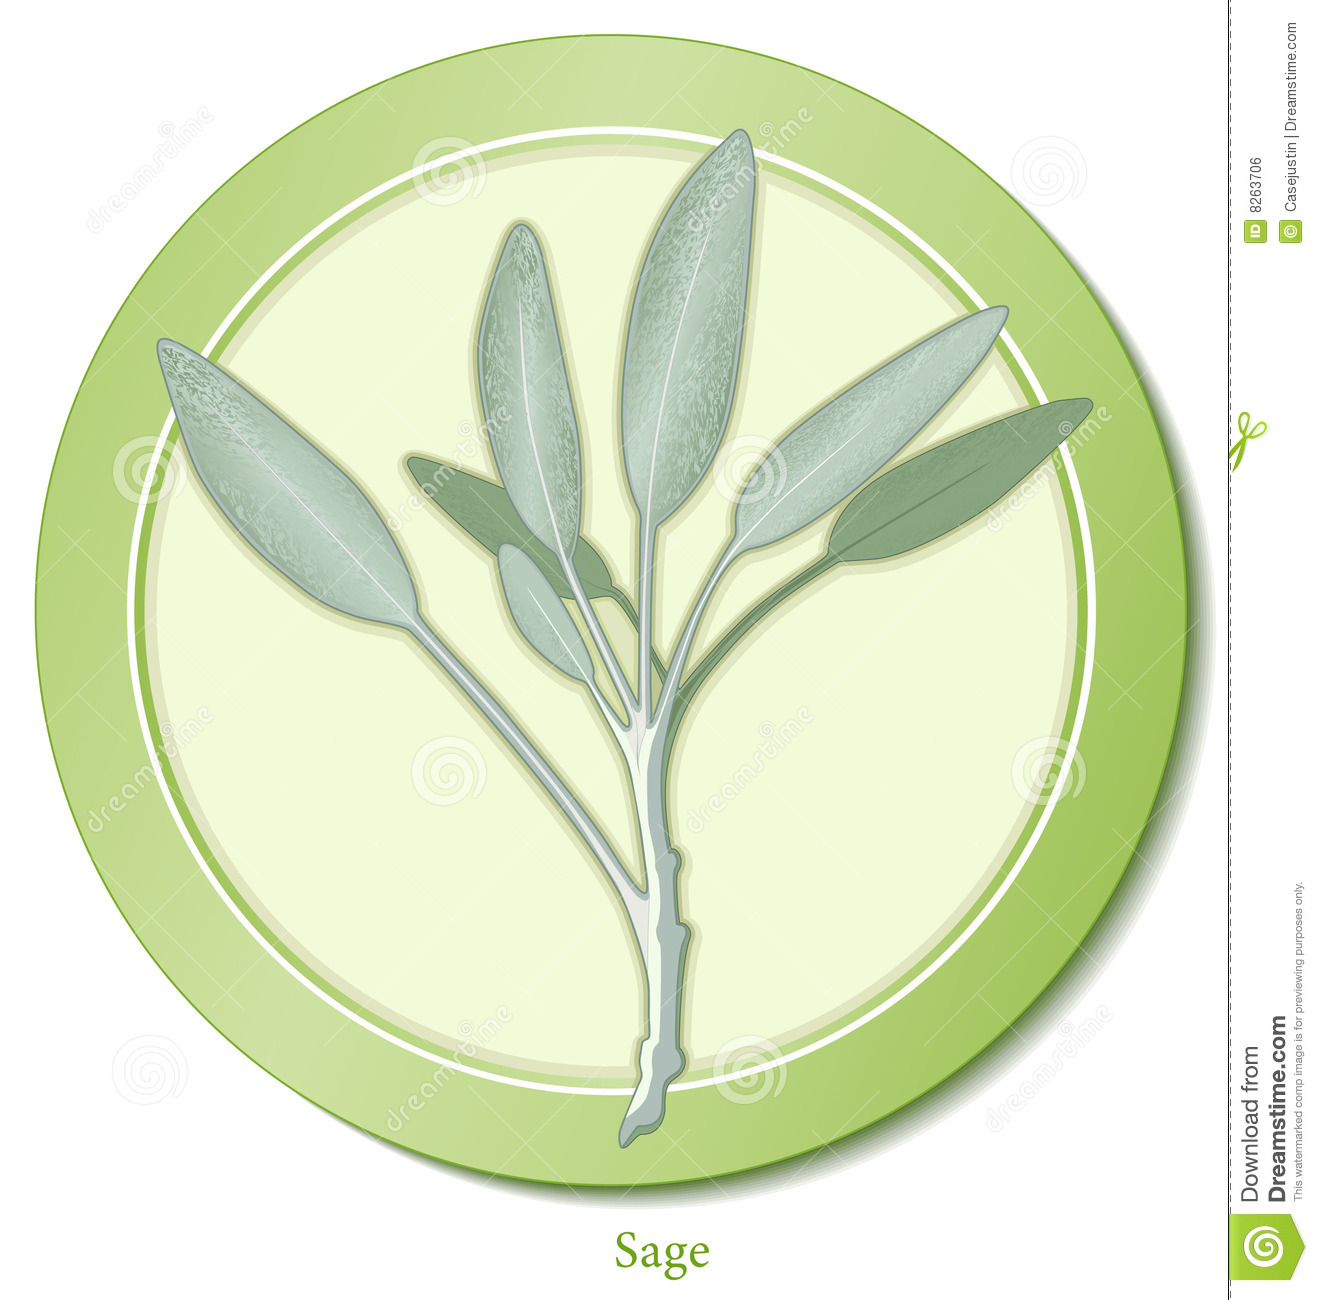 Sage Is A Perennial Garden Herb With Aromatic Gray Green Leaves Used